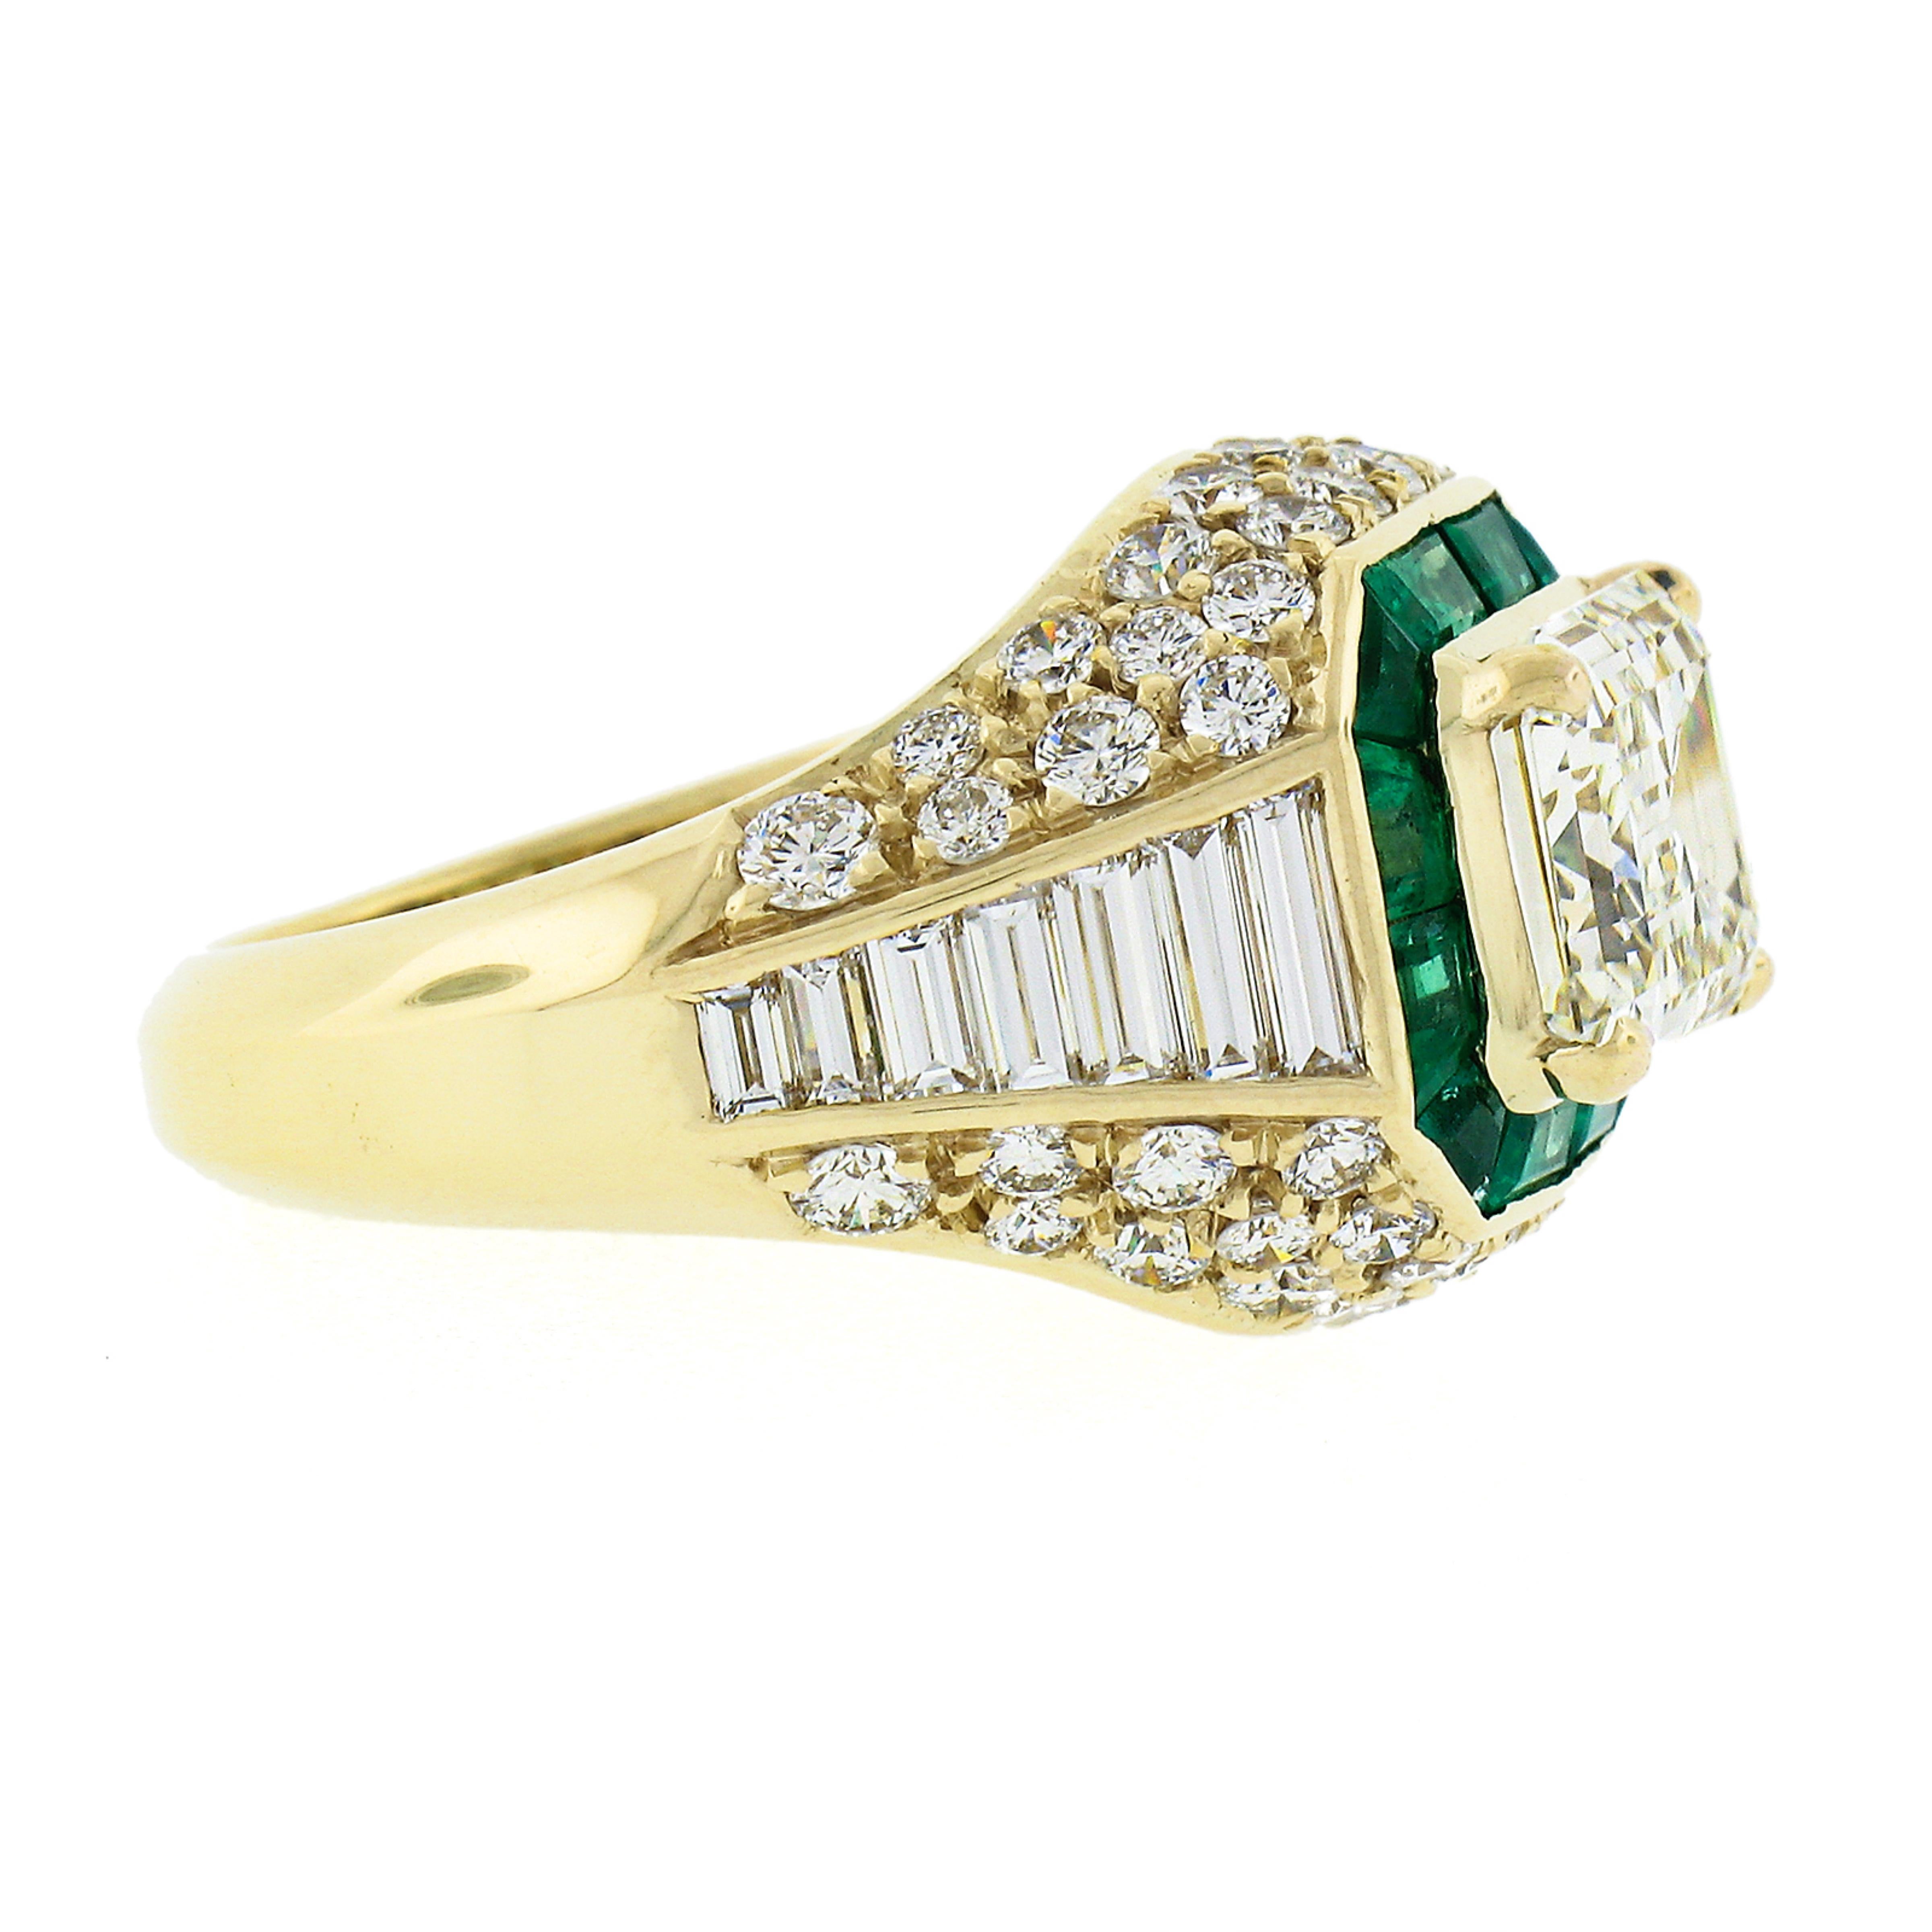 Estate 18k Yellow Gold 6.07ct GIA Emerald Cut & Baguette Diamond Engagement Ring For Sale 1